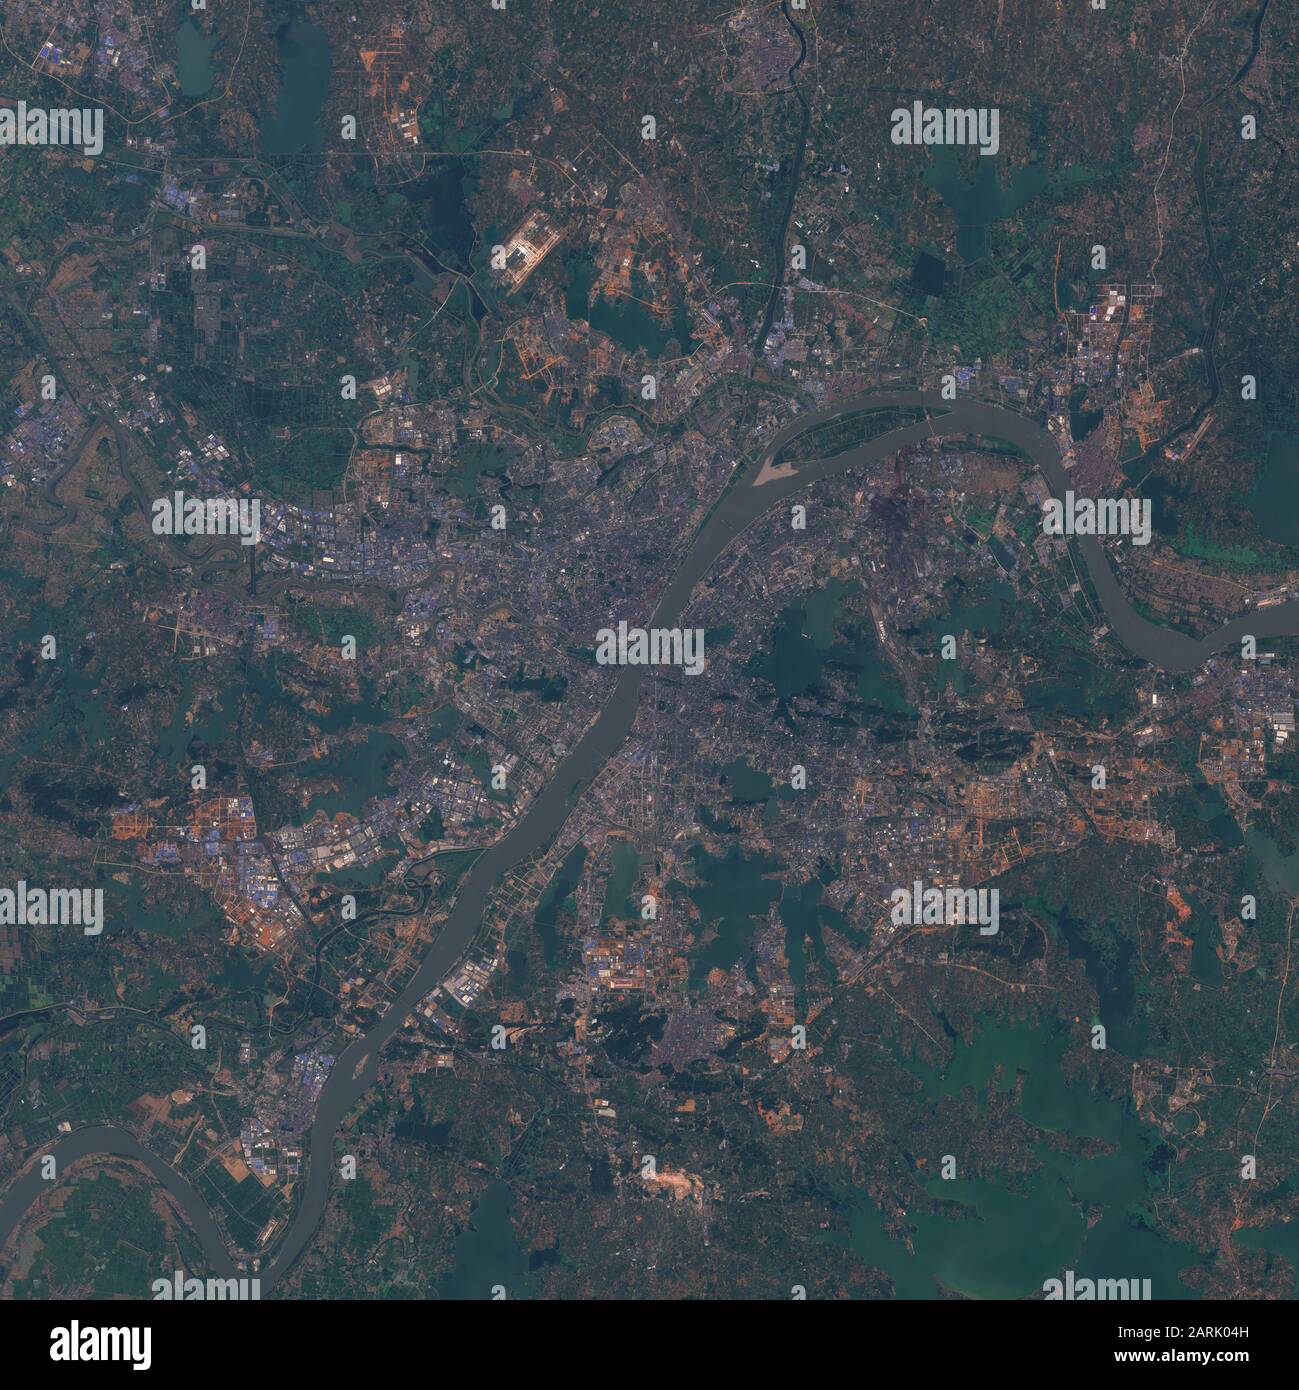 Wuhan, the capital of Hubei province, China, seen from space - contains modified Copernicus Sentinel Data (2019) Stock Photo